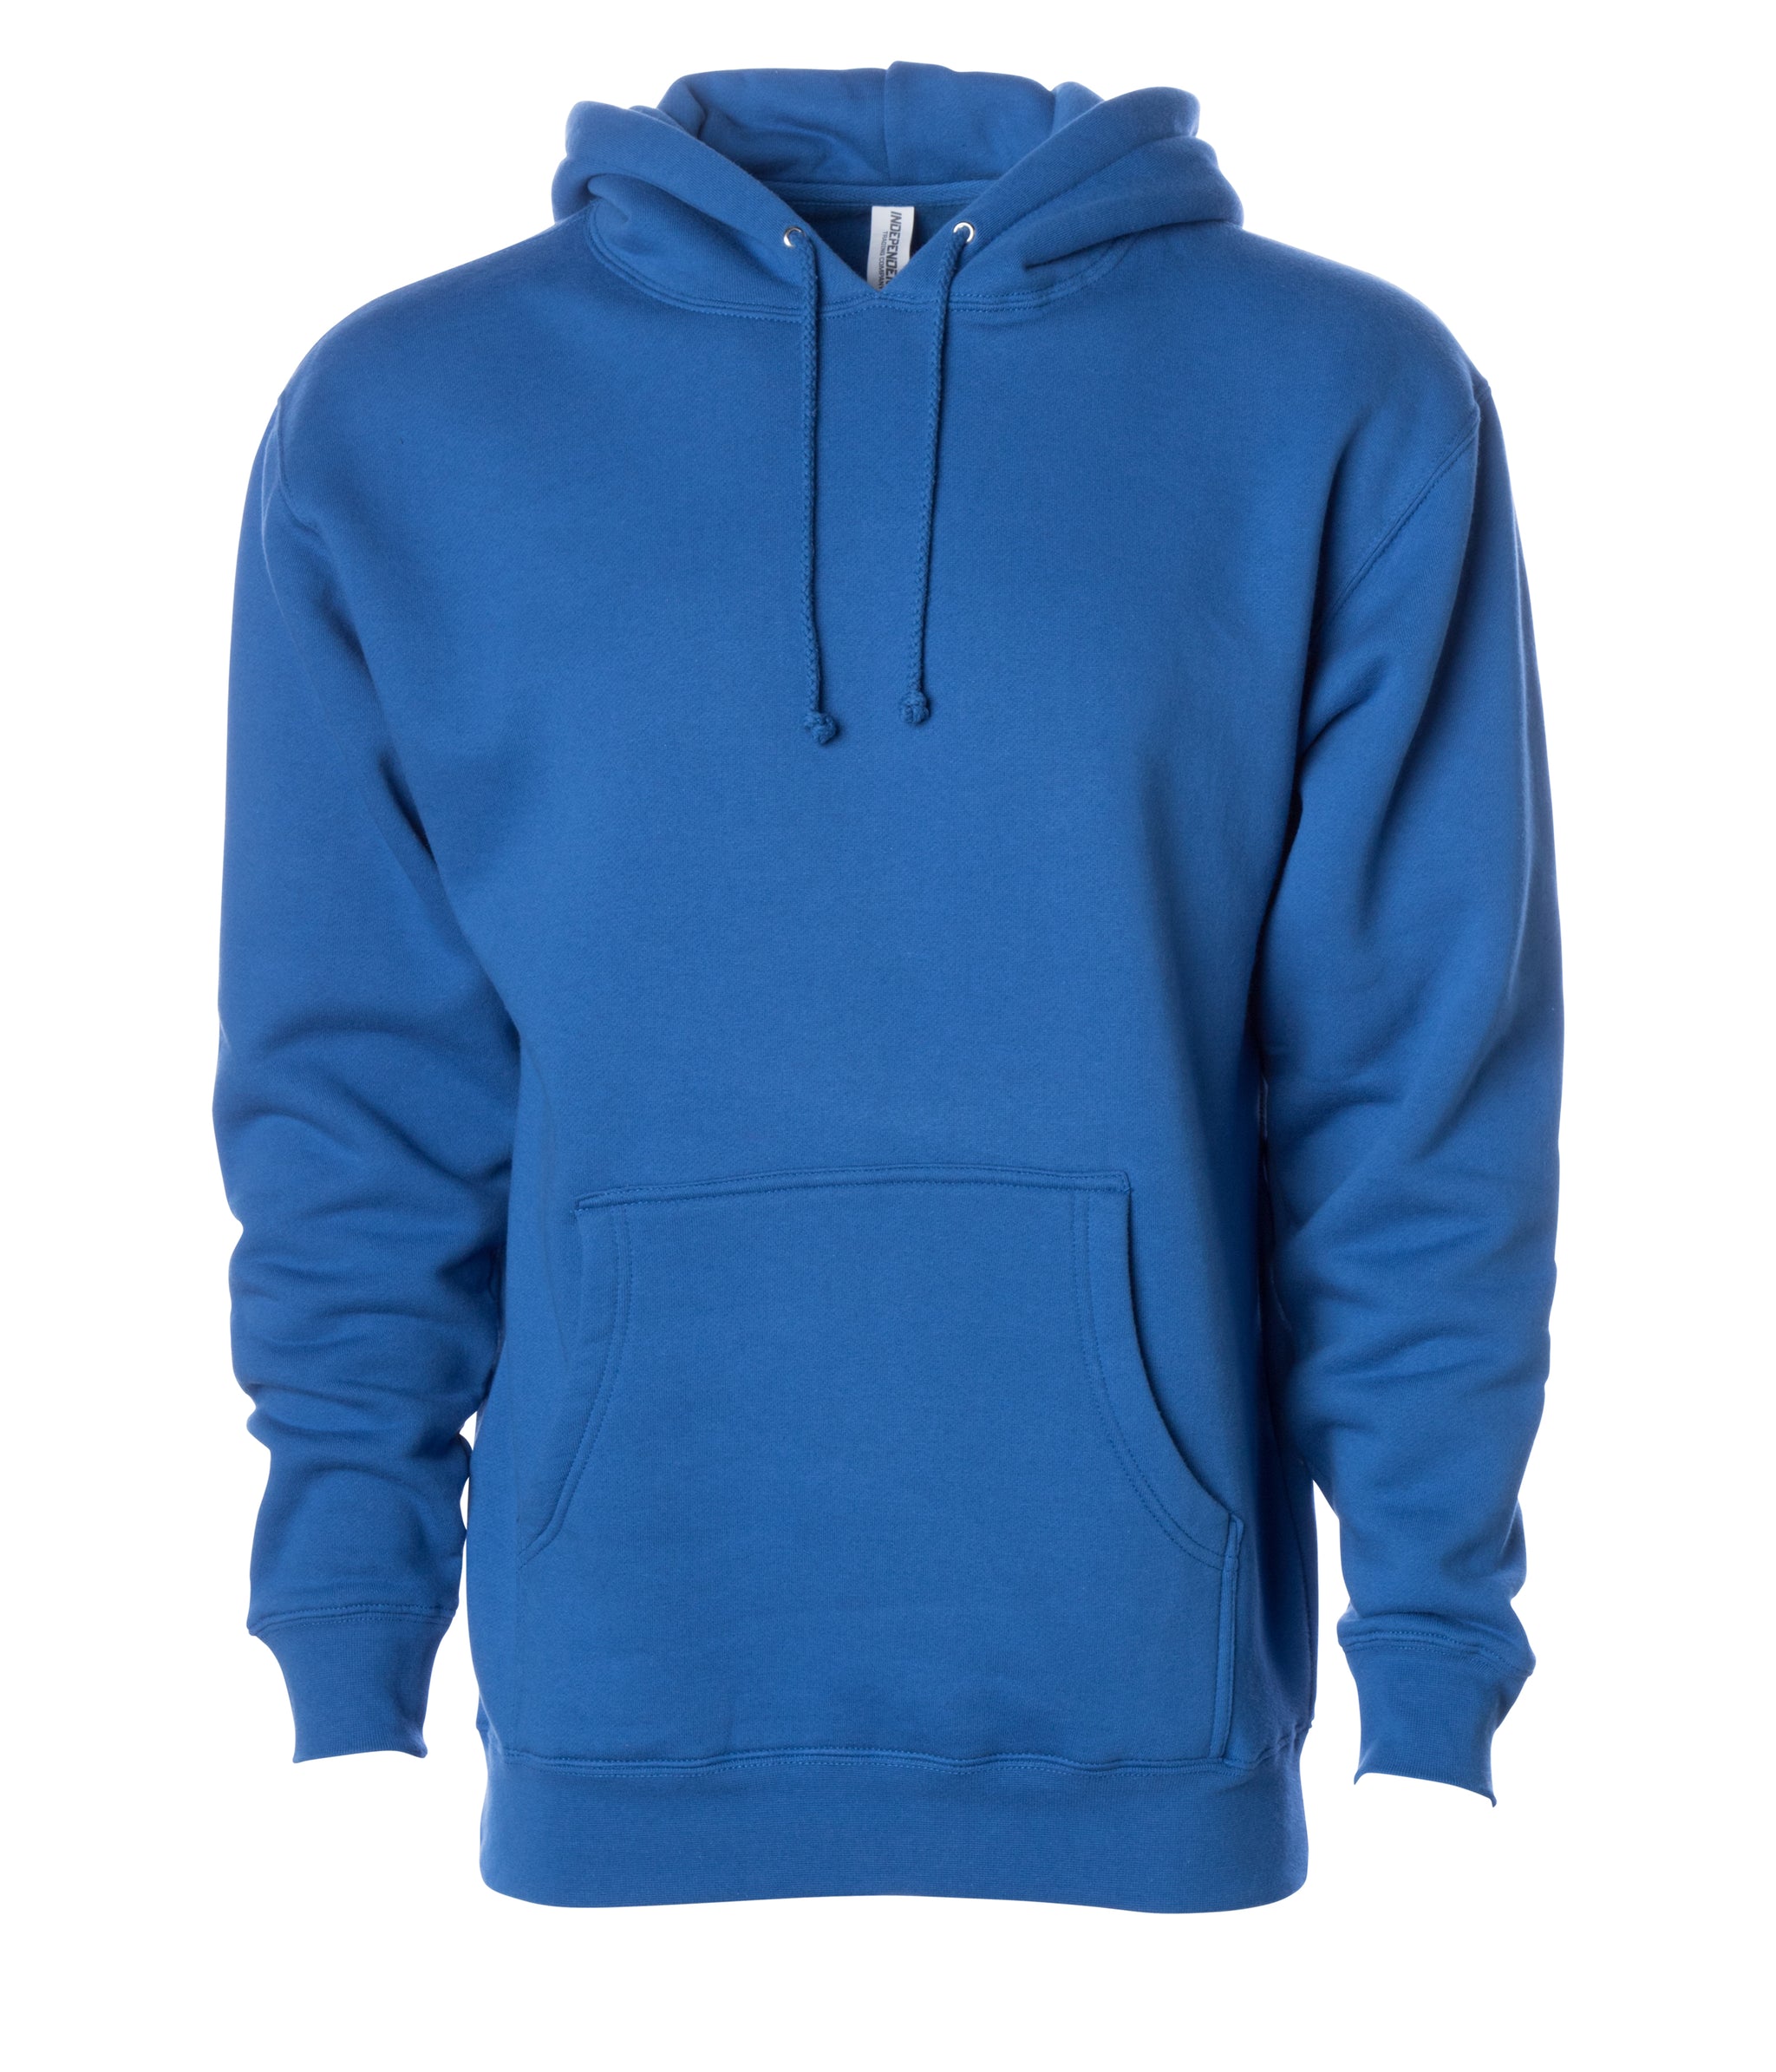 3XL-5XL Dual Color Hoodie 100% Polyester